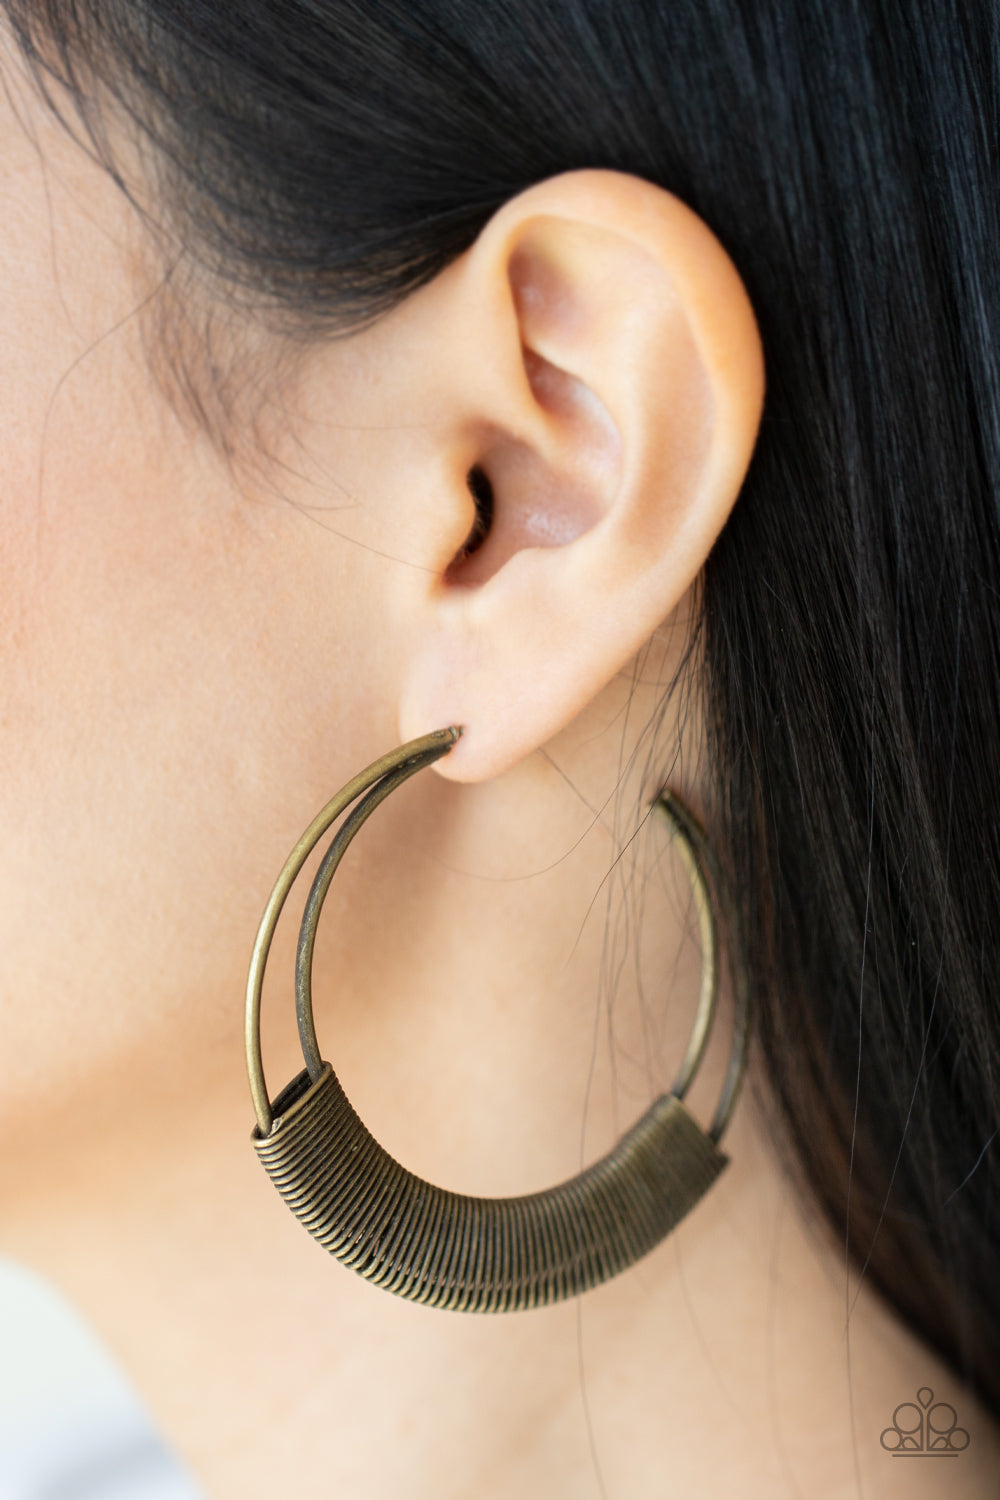 Artisan Attitude Brass Earring - Paparazzi Accessories  Gritty brass wire delicately wraps around the bottoms of two curving bars that coalesce into an antiqued crescent, creating a rustic hoop. Earring attaches to a standard post fitting. Hoop measures approximately 2 1/2" in diameter.  Sold as one pair of hoop earrings.